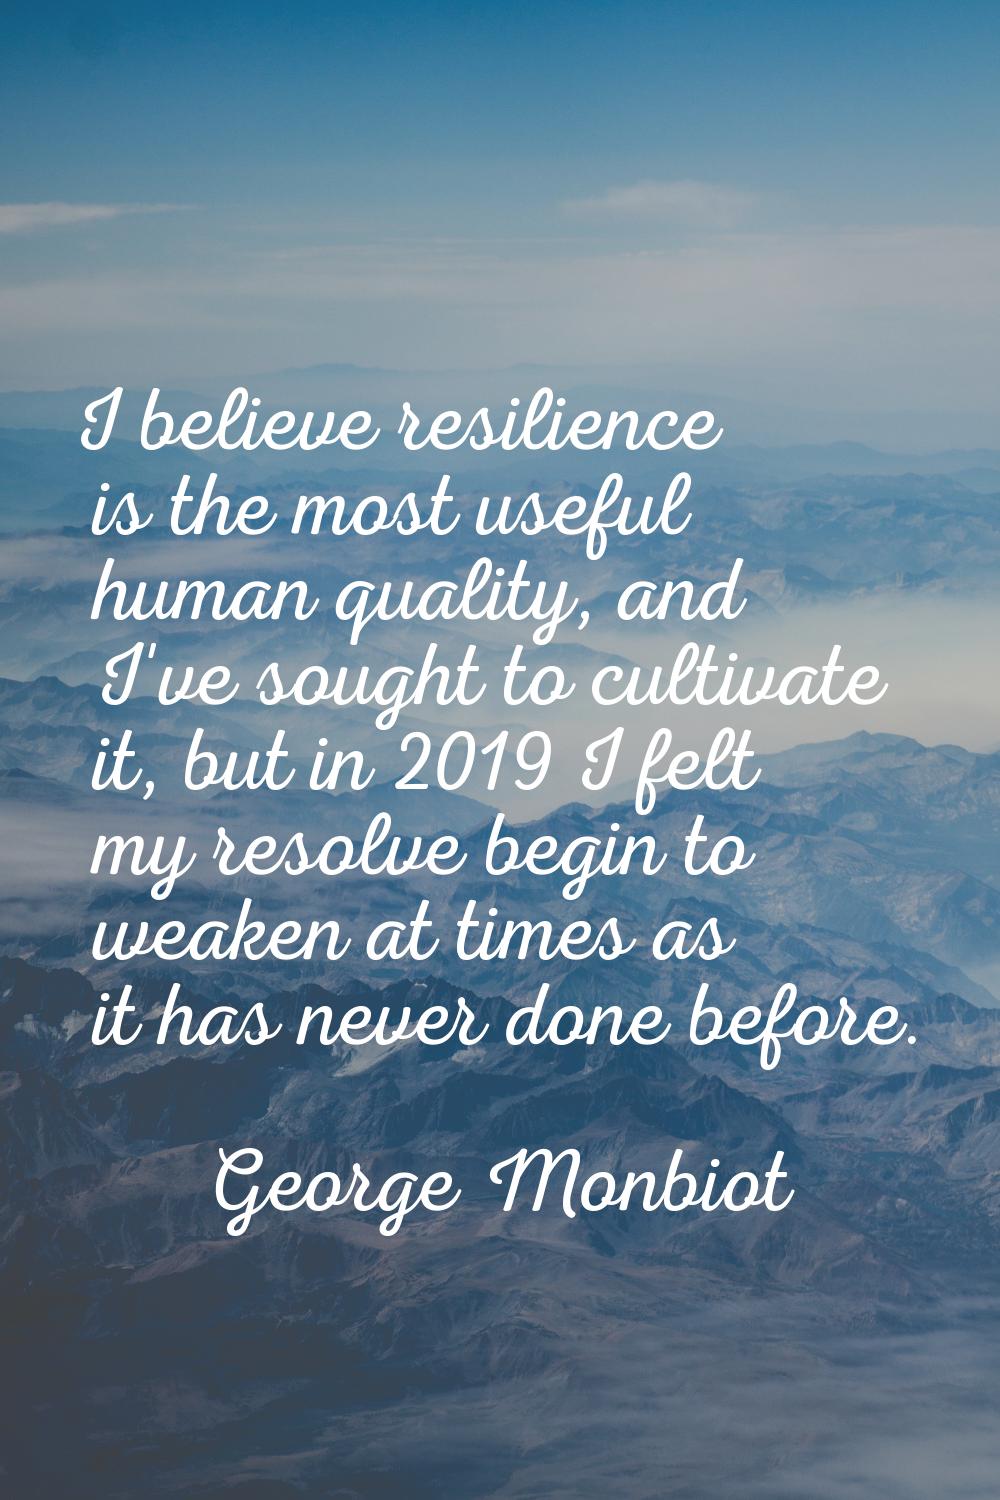 I believe resilience is the most useful human quality, and I've sought to cultivate it, but in 2019